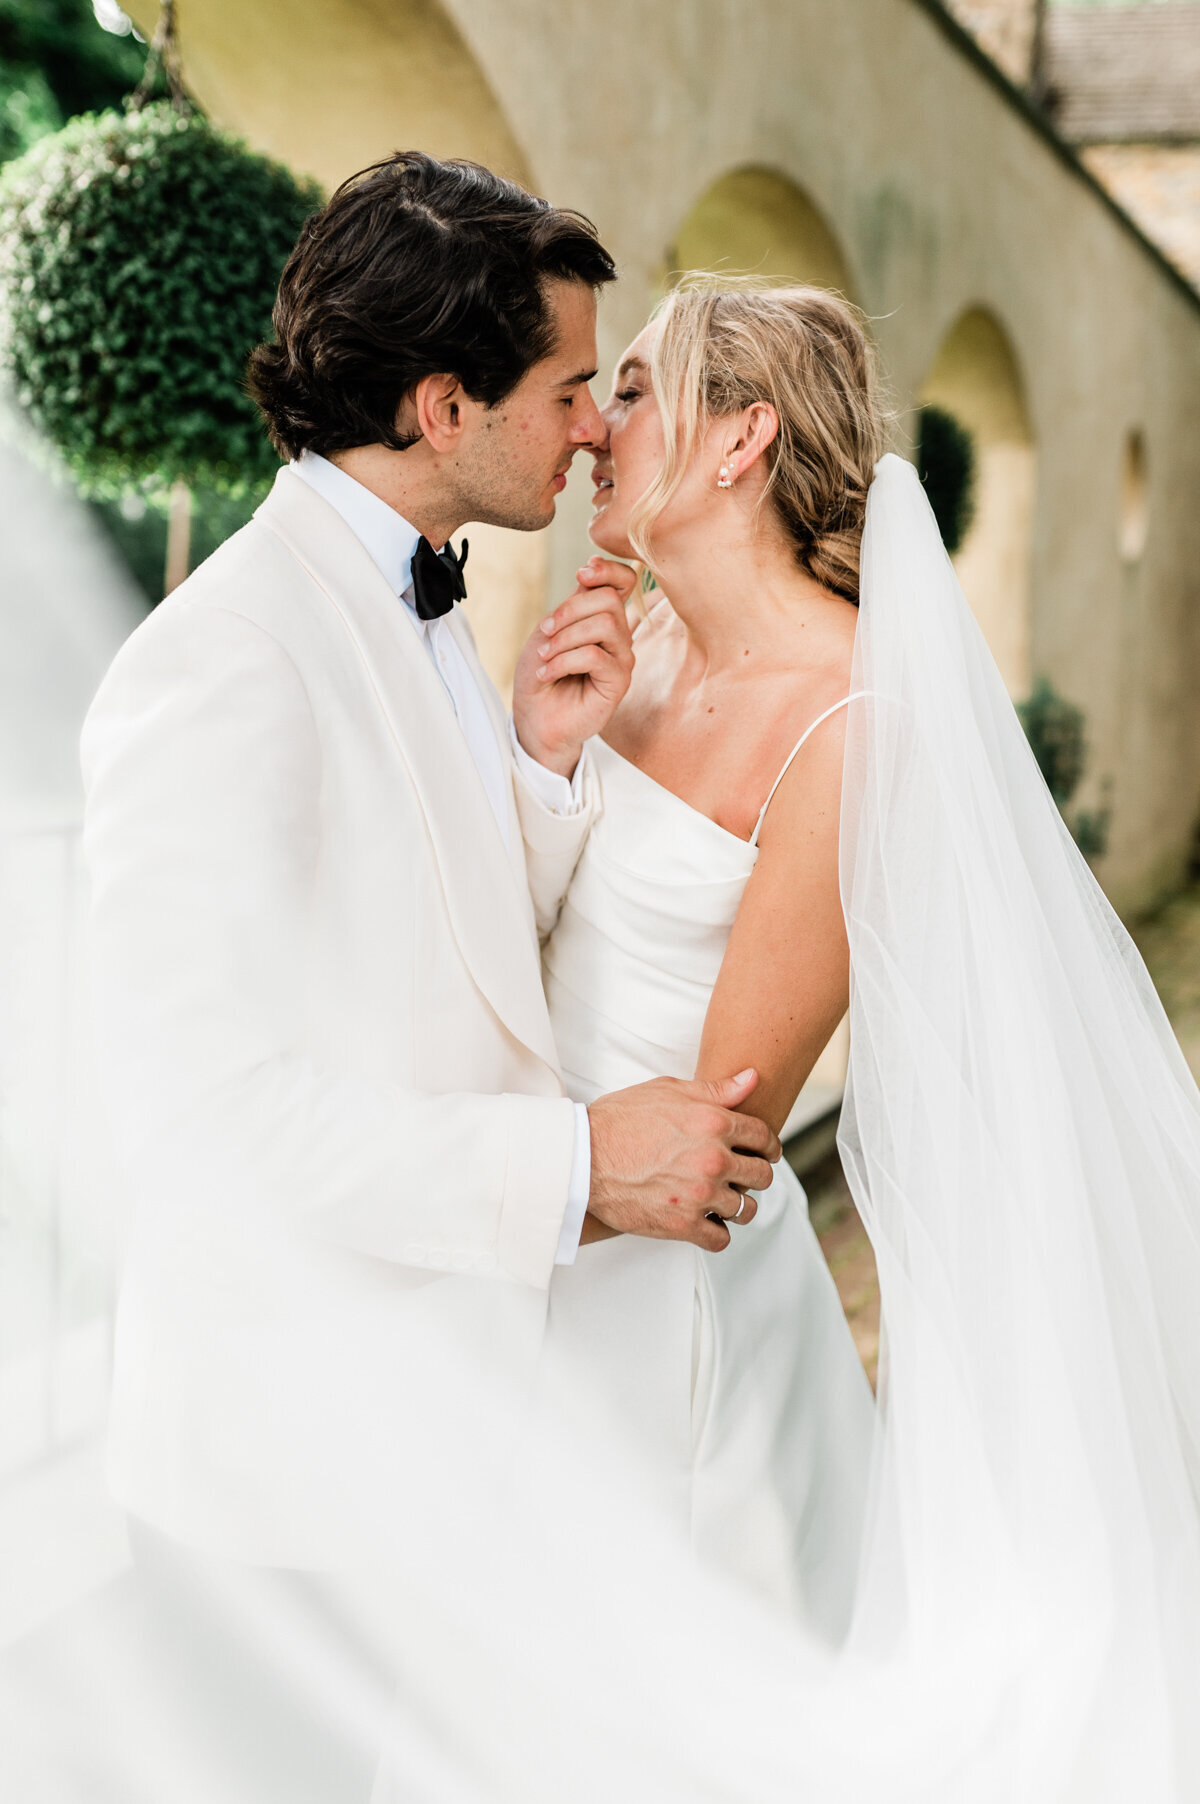 Exquisite Moments: Luxury Wedding Photography in Europe. Our focus on capturing genuine emotions results in images that evoke joy and love in every frame.